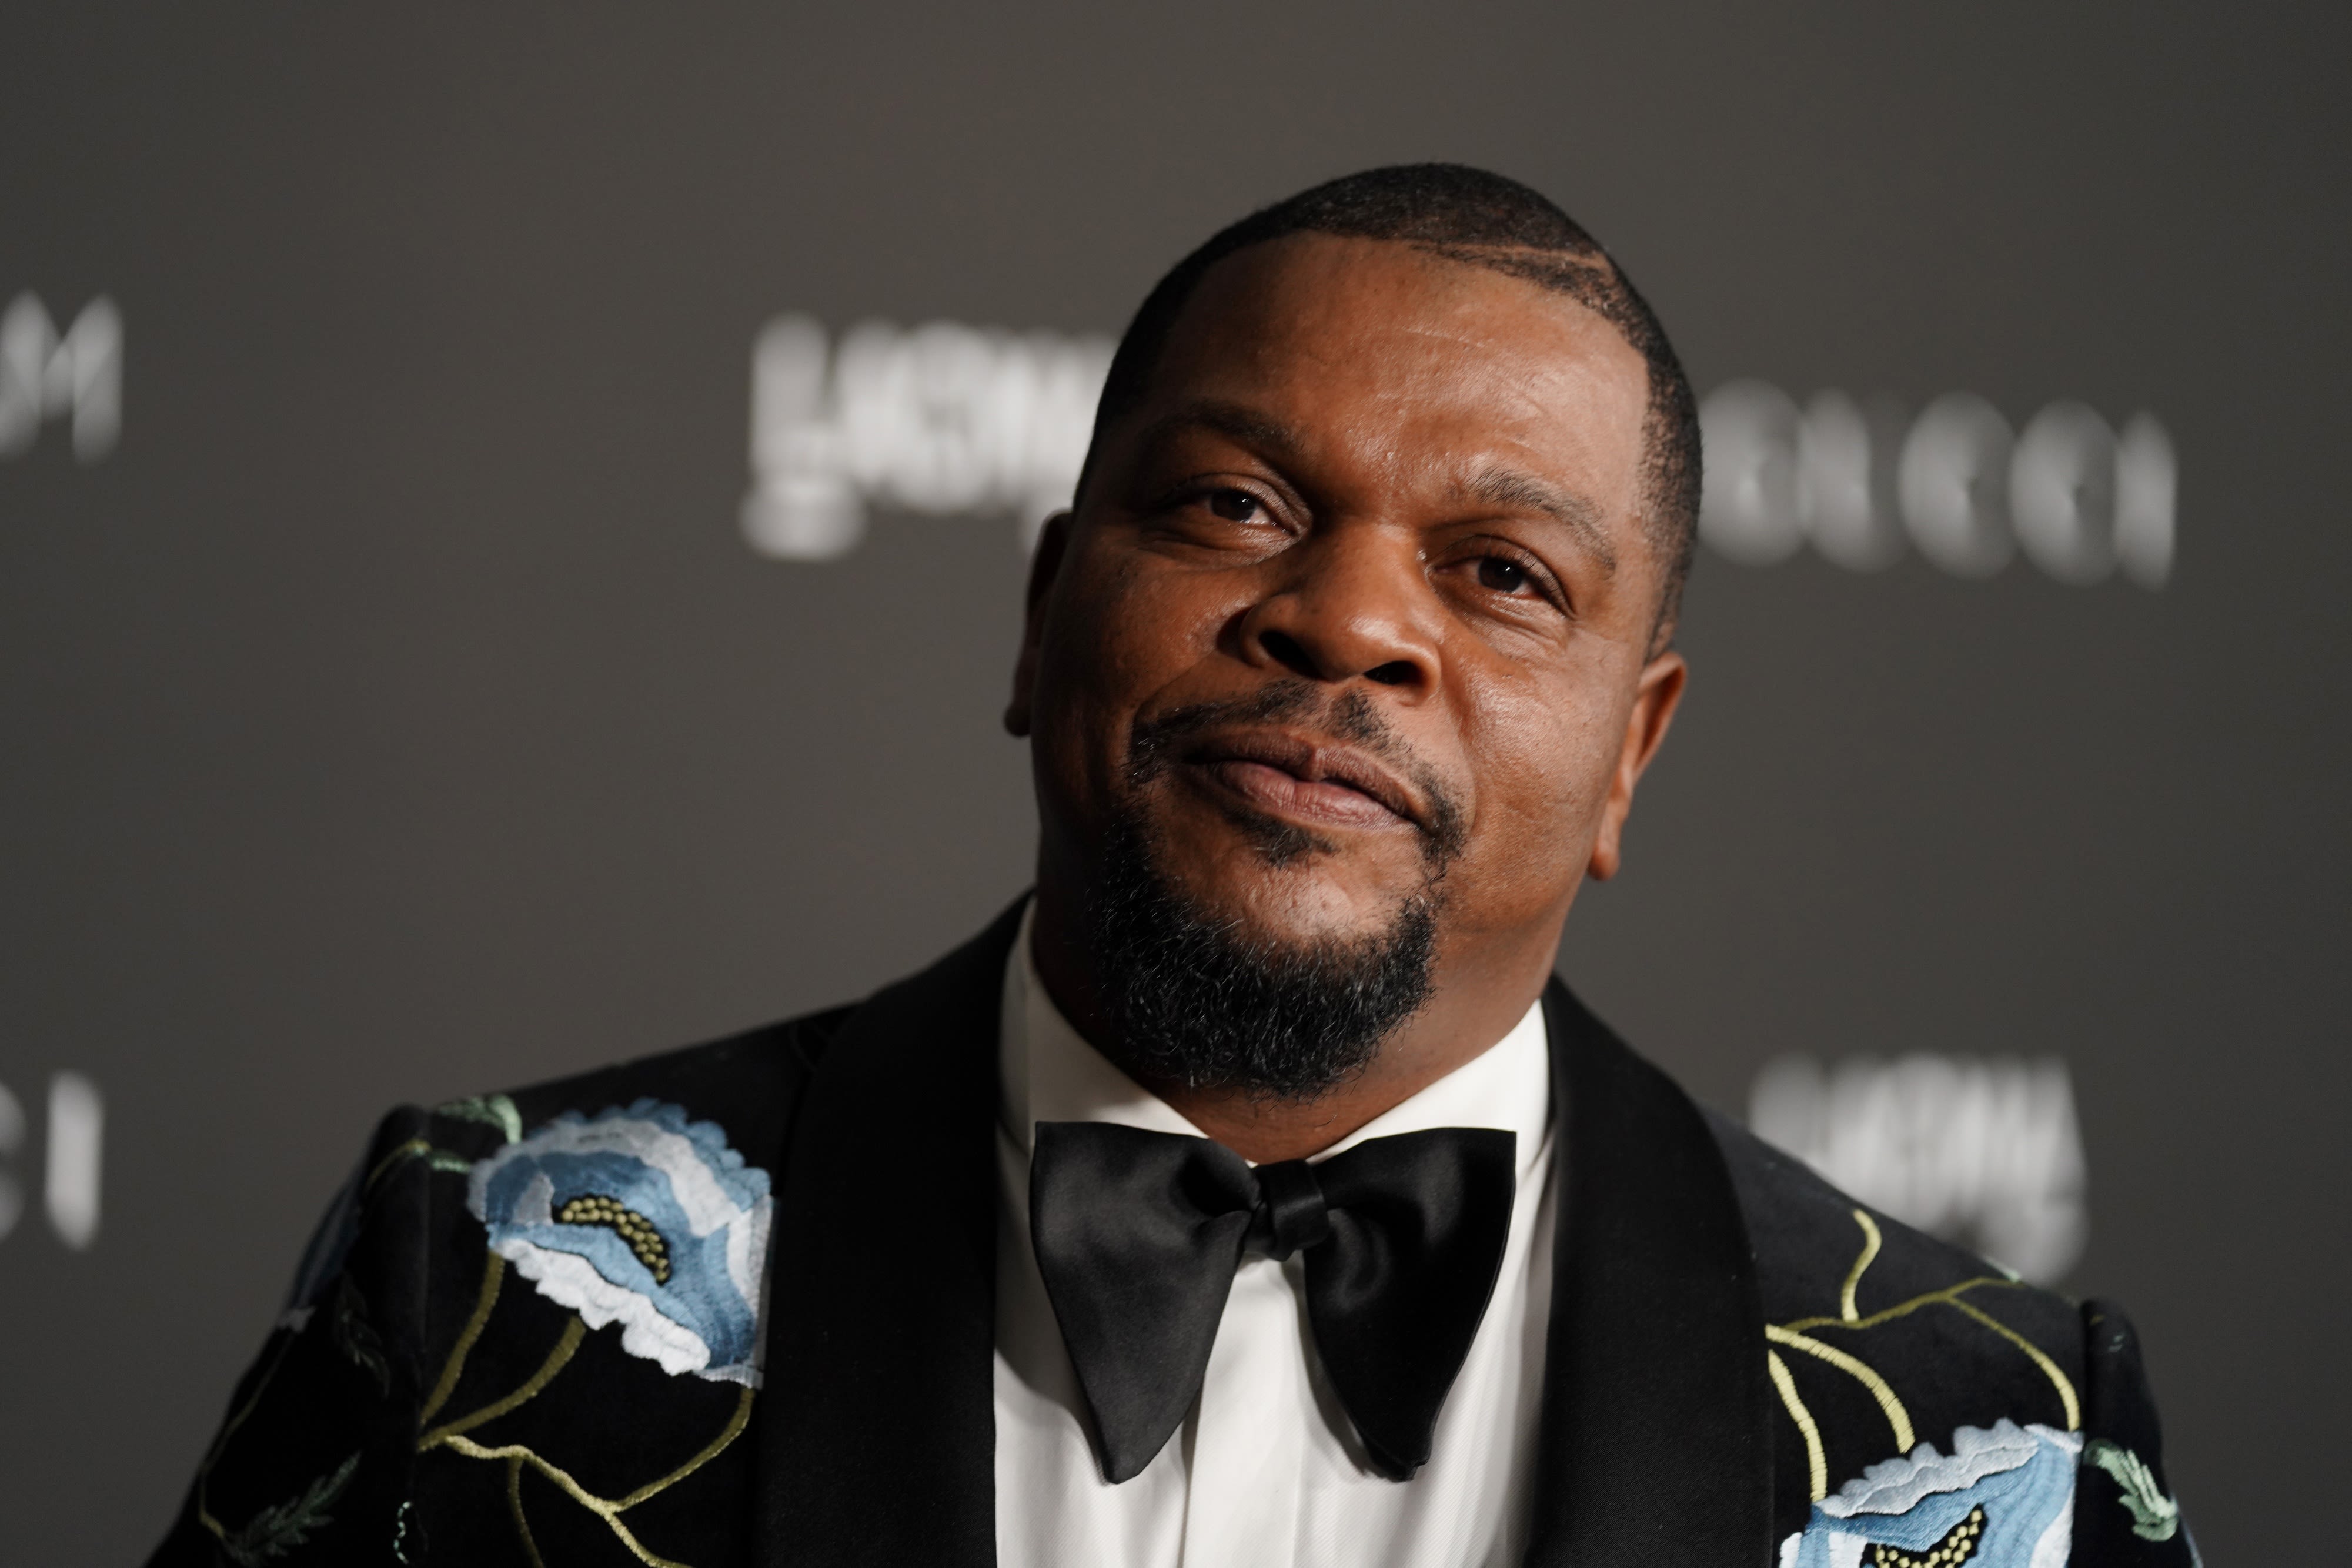 Kehinde Wiley denies accusations of sexual assault from fellow artist